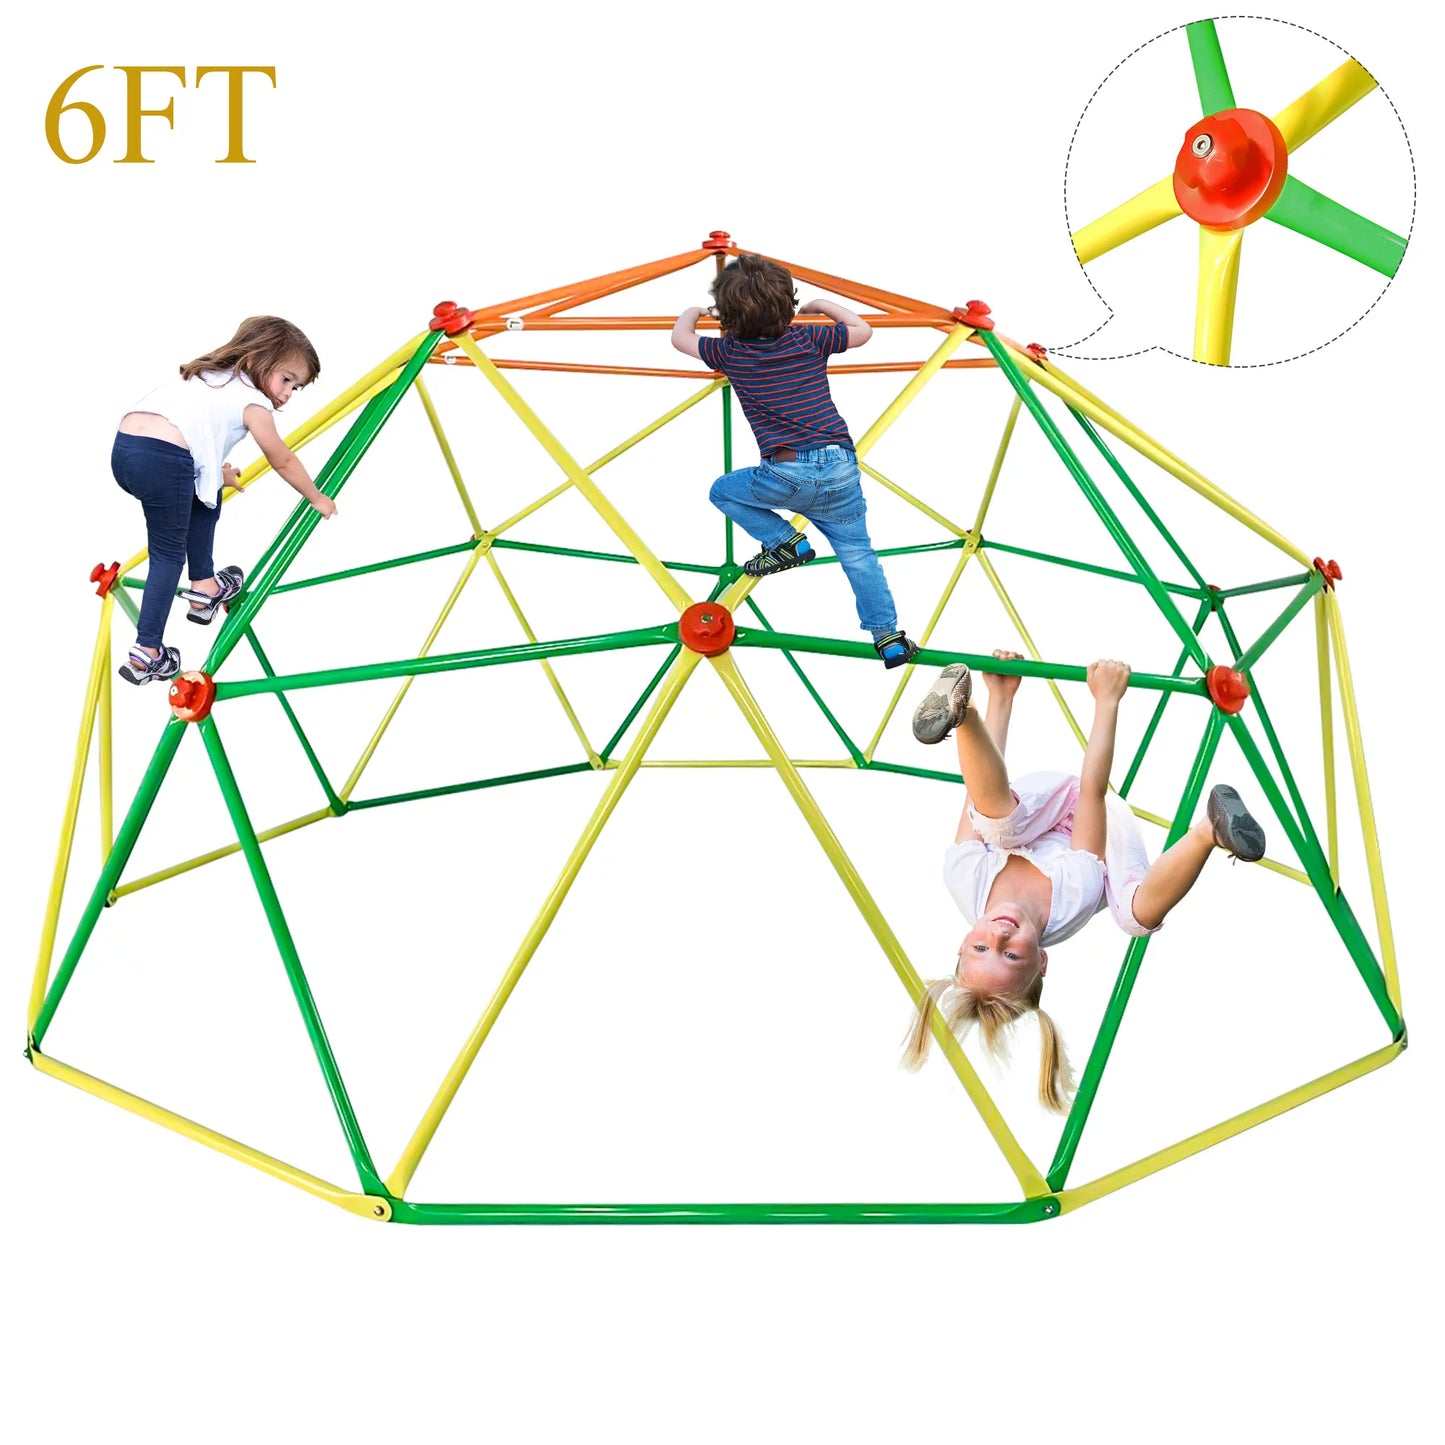 SYNGAR Outdoor Climbing Dome, 10ft Jungle Gym Dome Climber for Kids Age 3-12, 800 lbs Weight Capacity, D9213